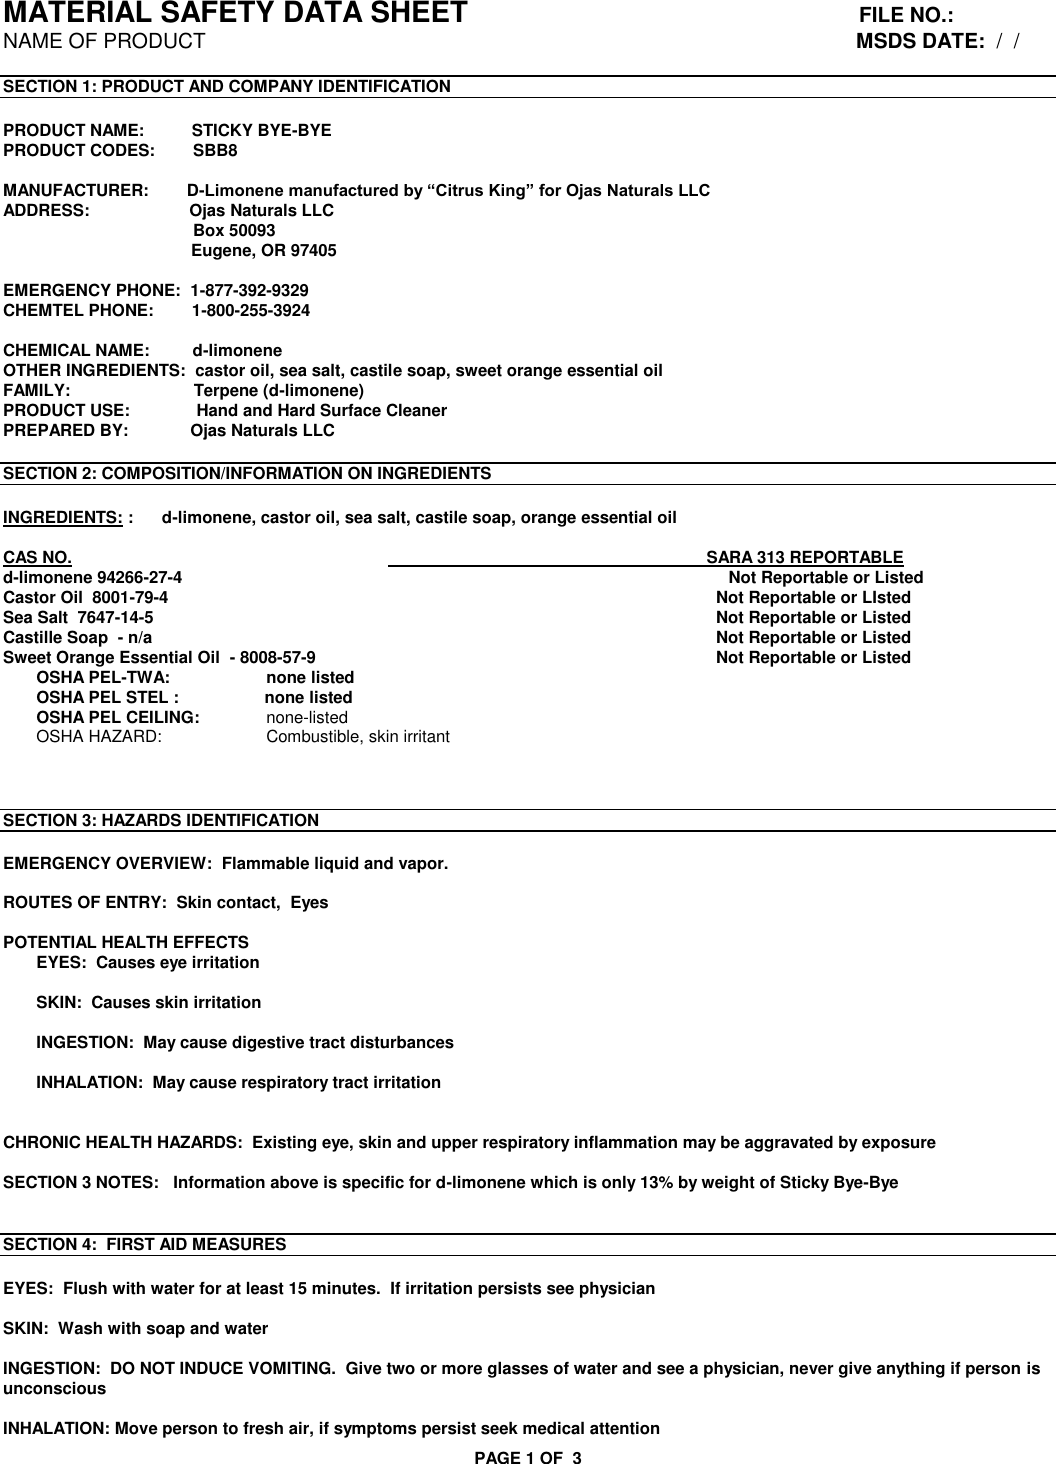 Page 1 of 3 - MATERIAL SAFETY DATA SHEET  OF X 704435 MSDS